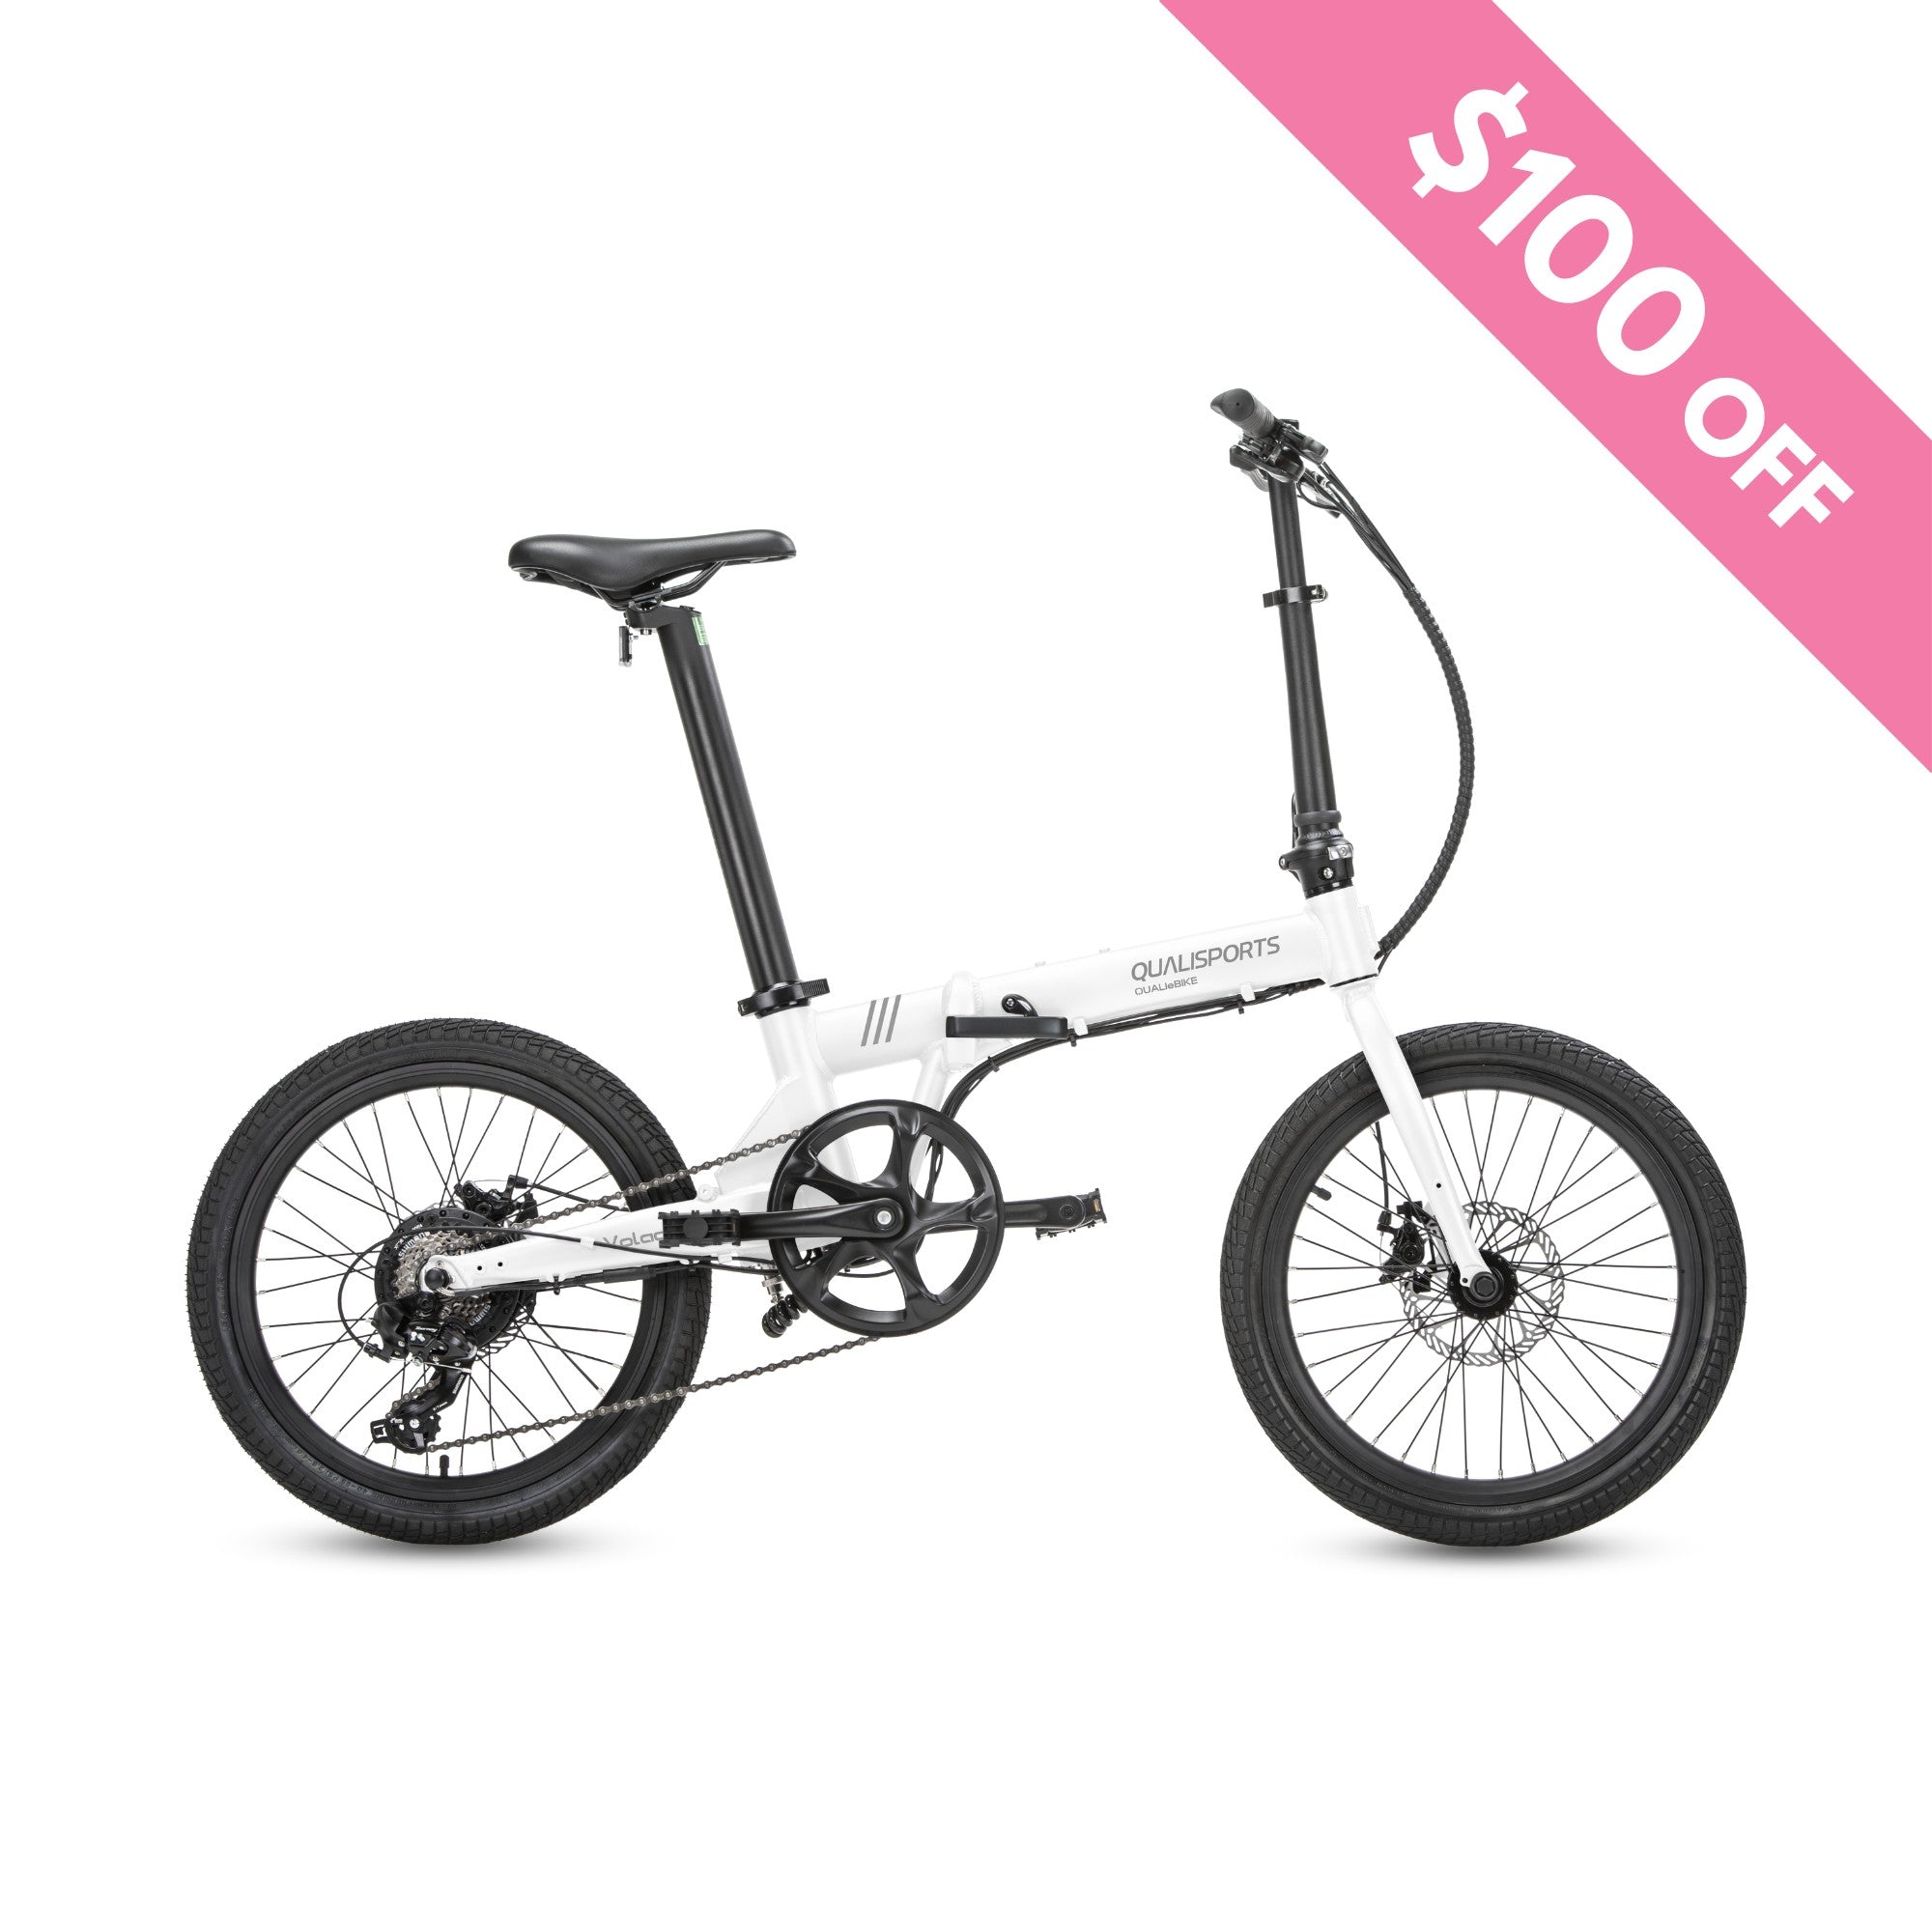 A white folding bicycle with black tires and seat, featuring a crossbar marked with the brand name "Qualisports USA." A pink banner in the top right corner displays "$100 OFF" in white text. Mid-June ETA for delivery. Product Name: VOLADOR PRE-ORDER